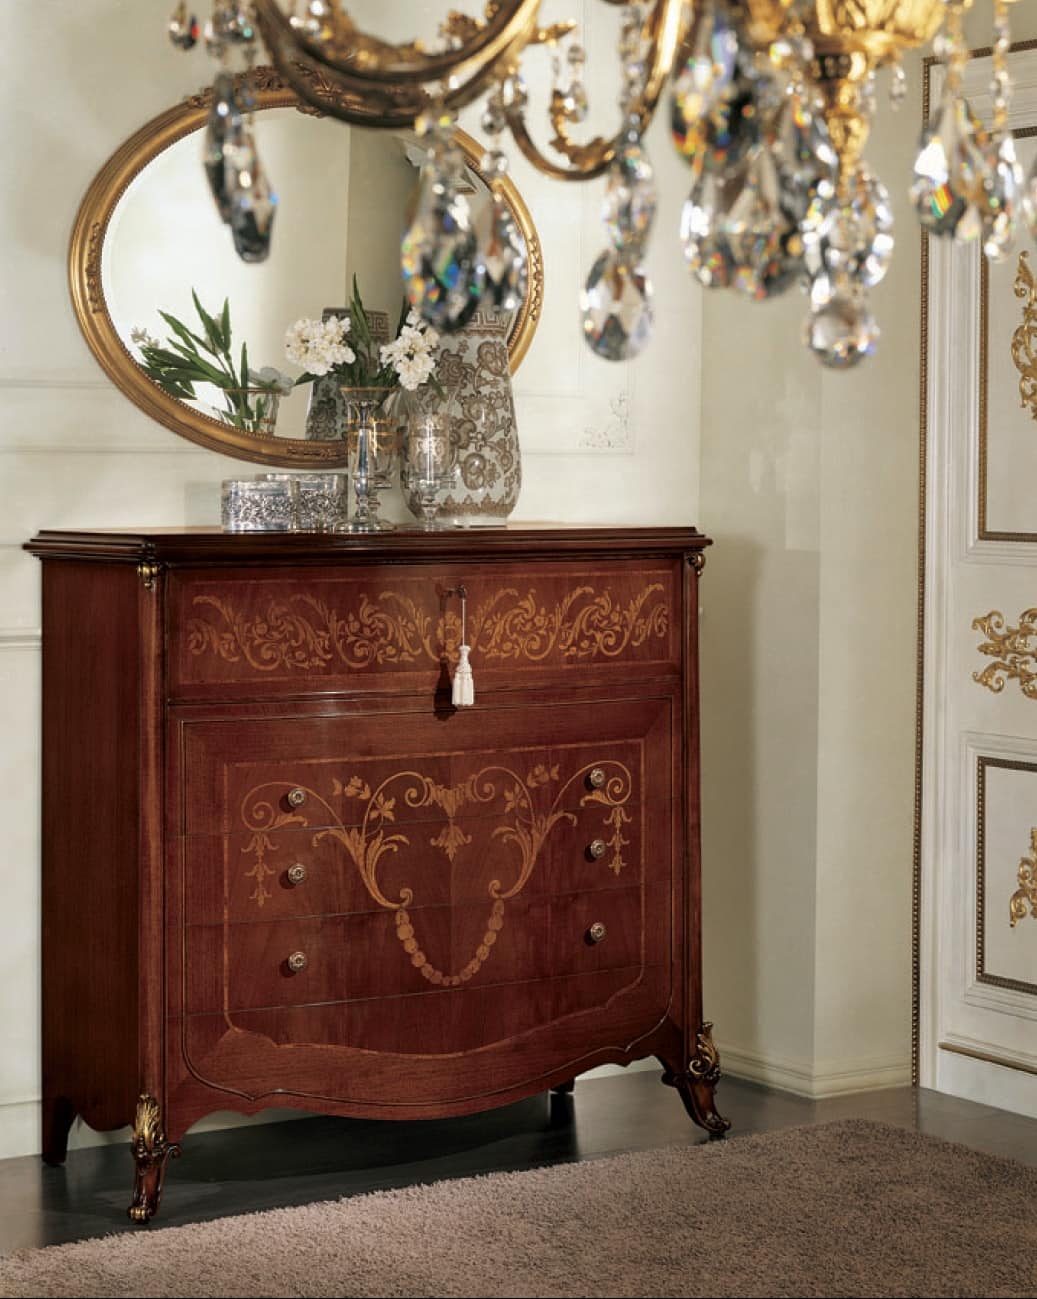 Orchidea ribalta, Chest of drawers with flap, richly inlaid, gold decorations